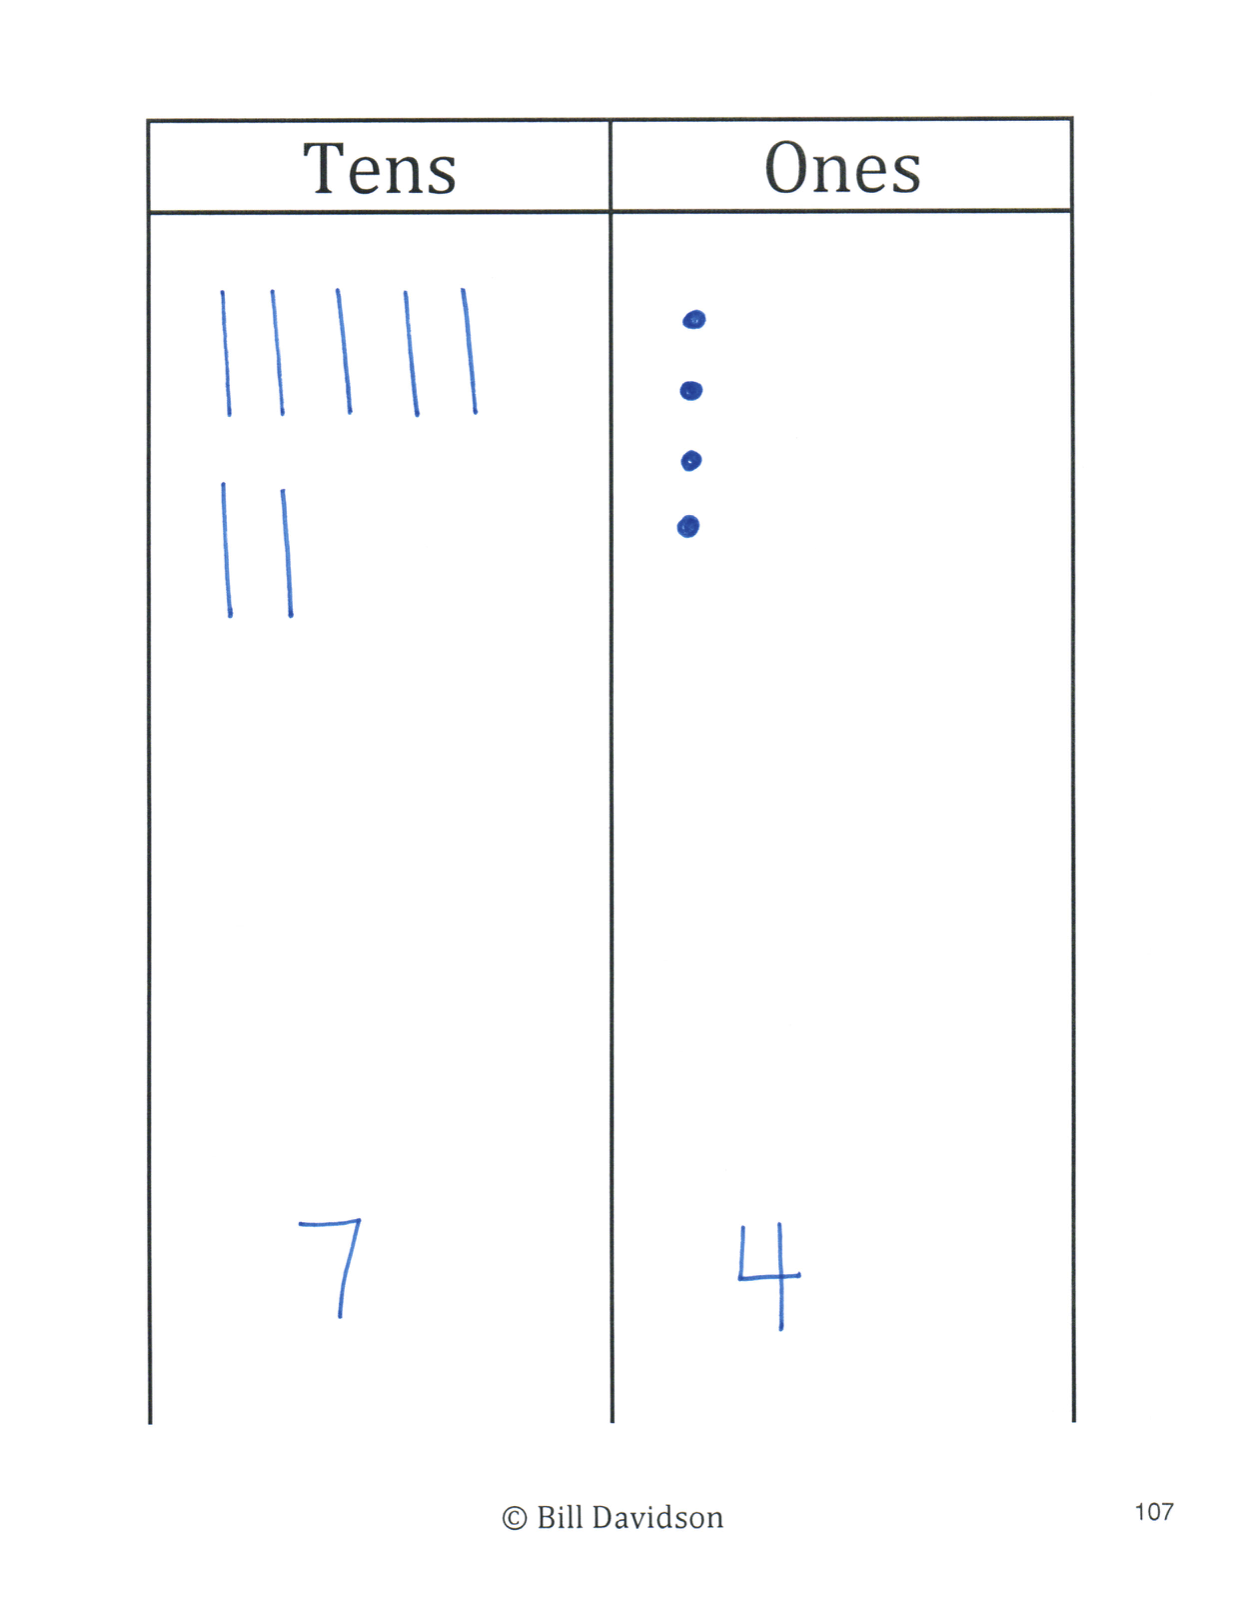 Tens and Ones Place Value Chart — The Davidson Group